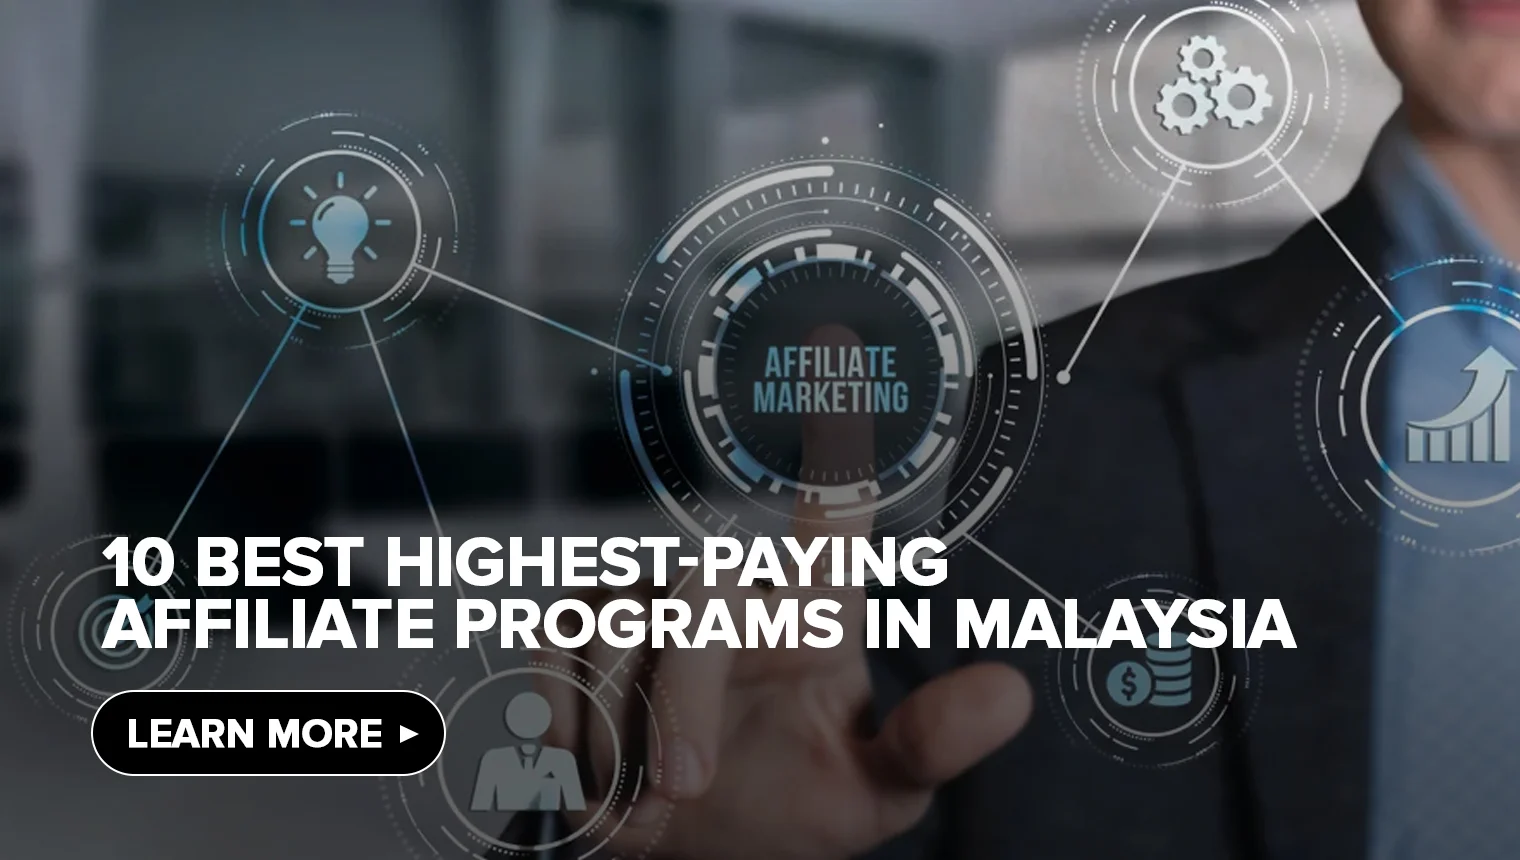 You are currently viewing 10 Best Highest-Paying Affiliate Programs in Malaysia